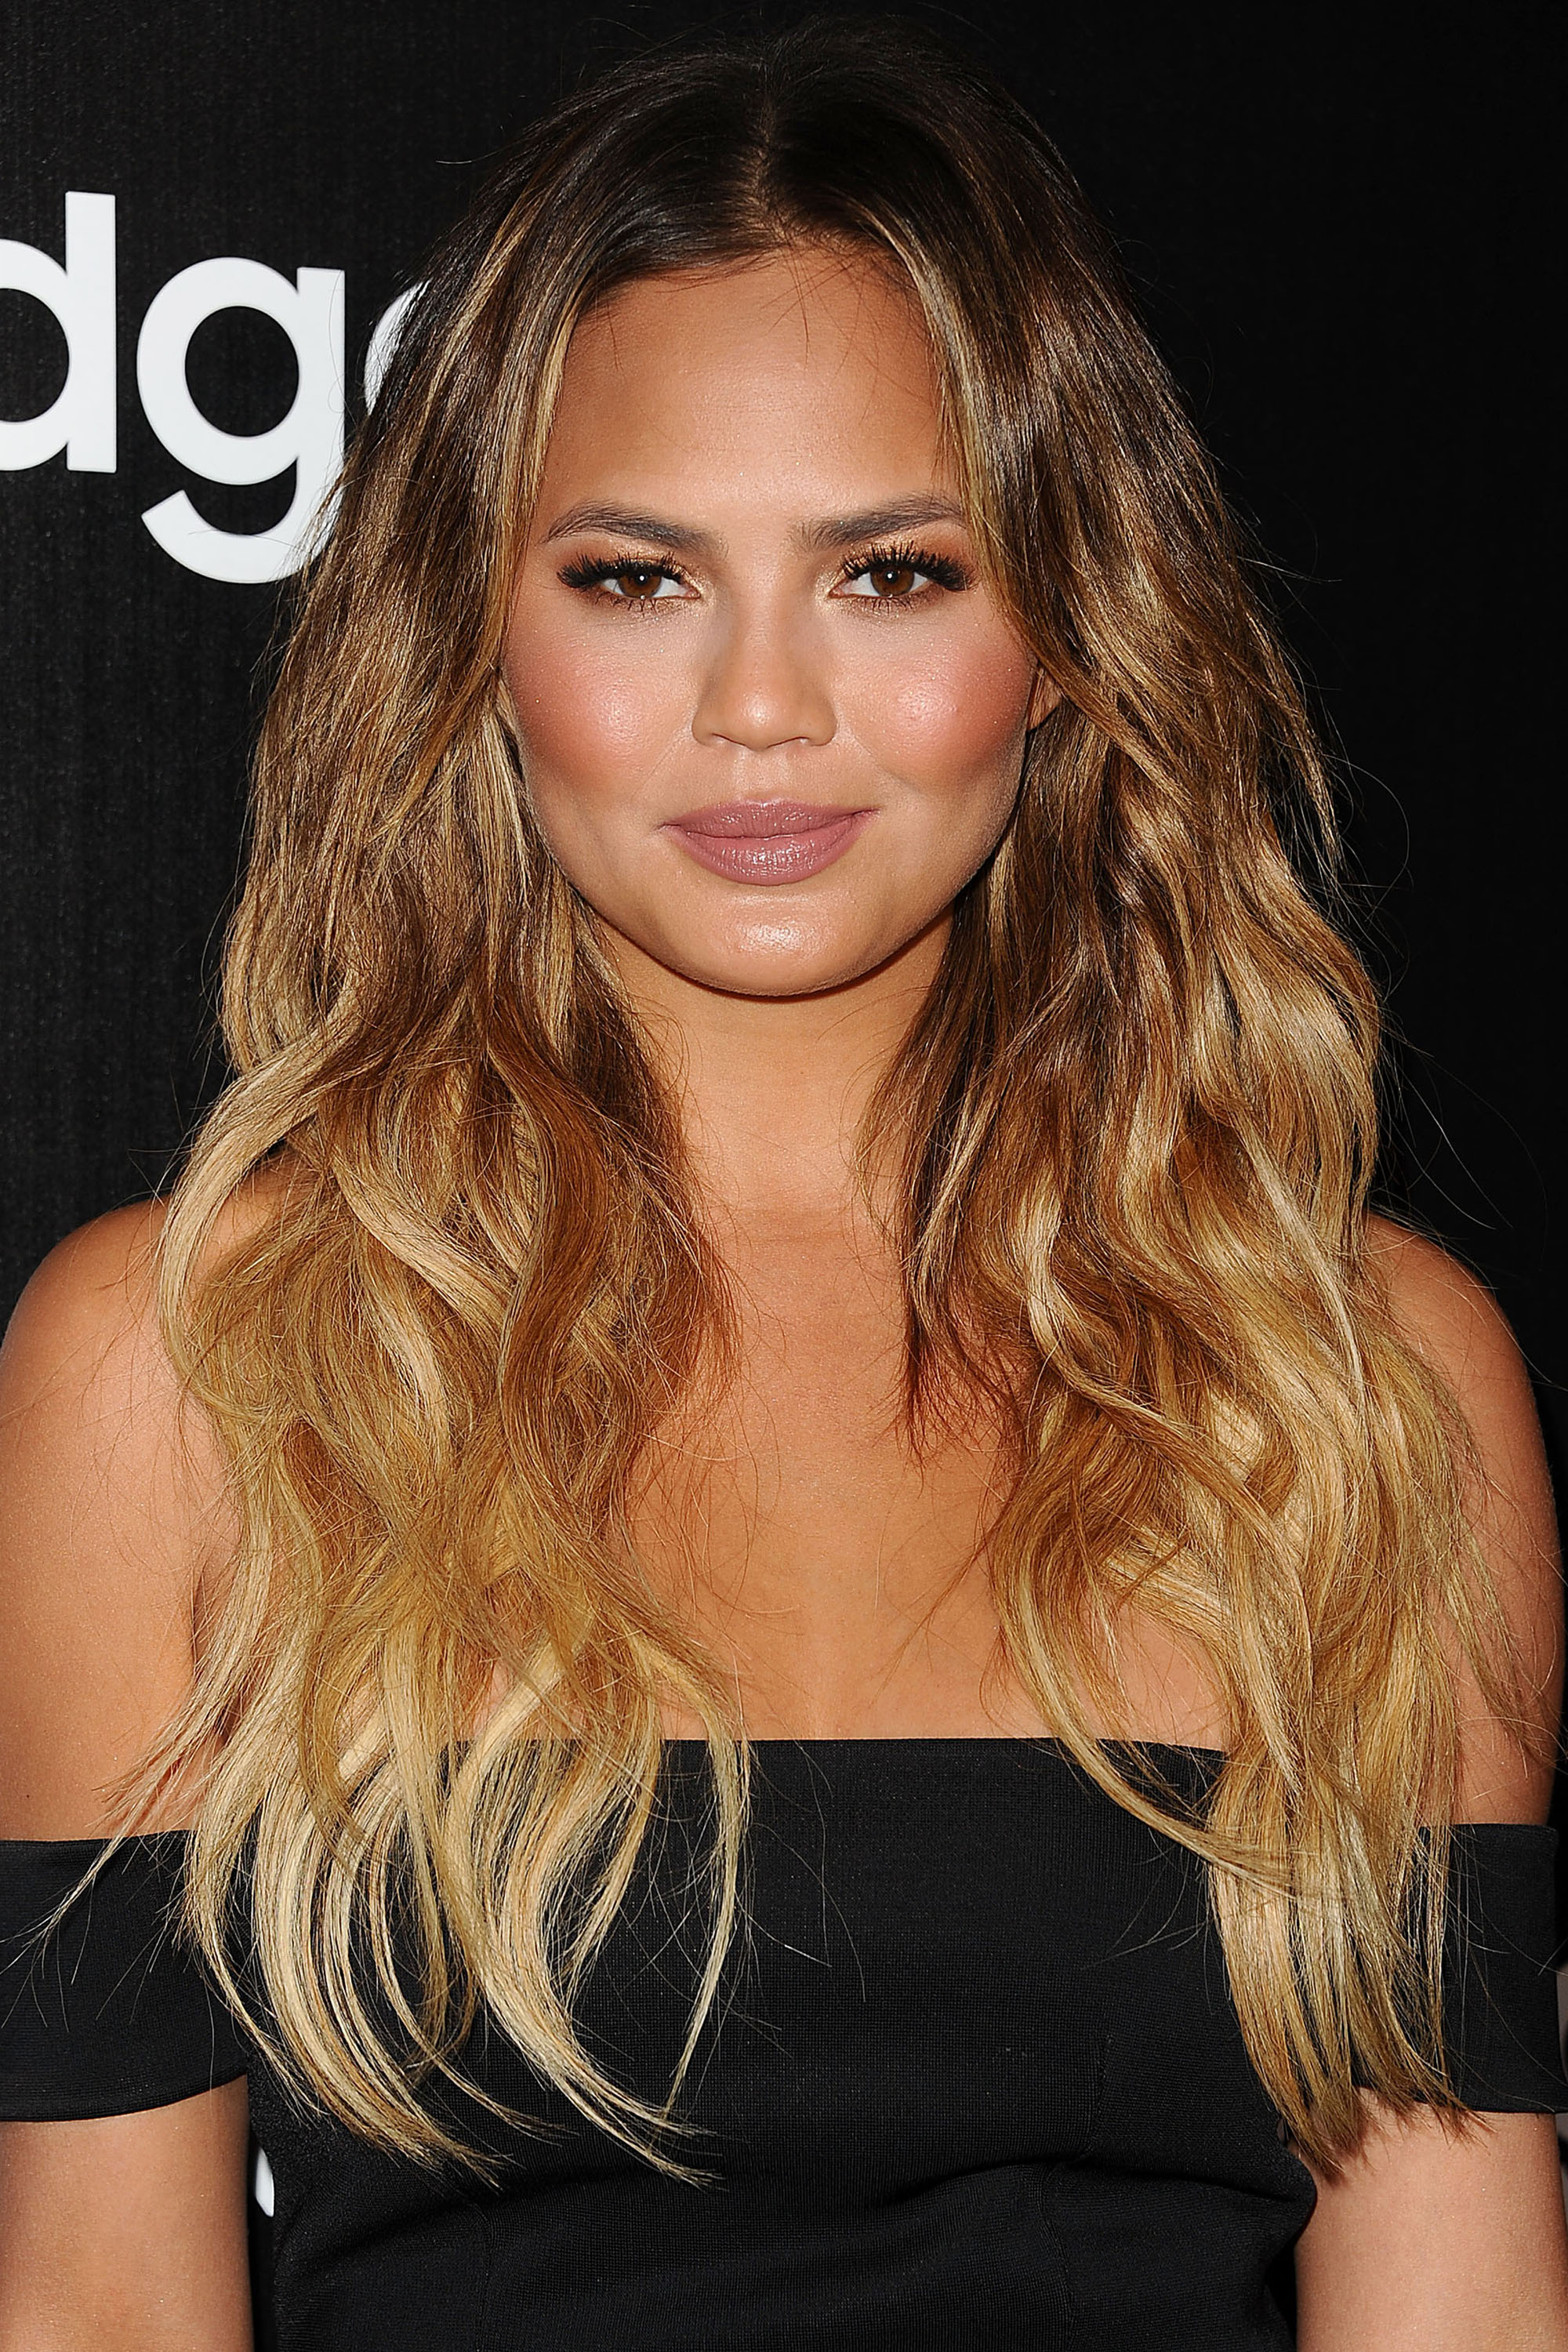 WEST HOLLYWOOD, CA - AUGUST 18: Chrissy Teigen attends the Samsung launch party on August 18, 2015 in West Hollywood, California. (Photo by Jason LaVeris/FilmMagic)